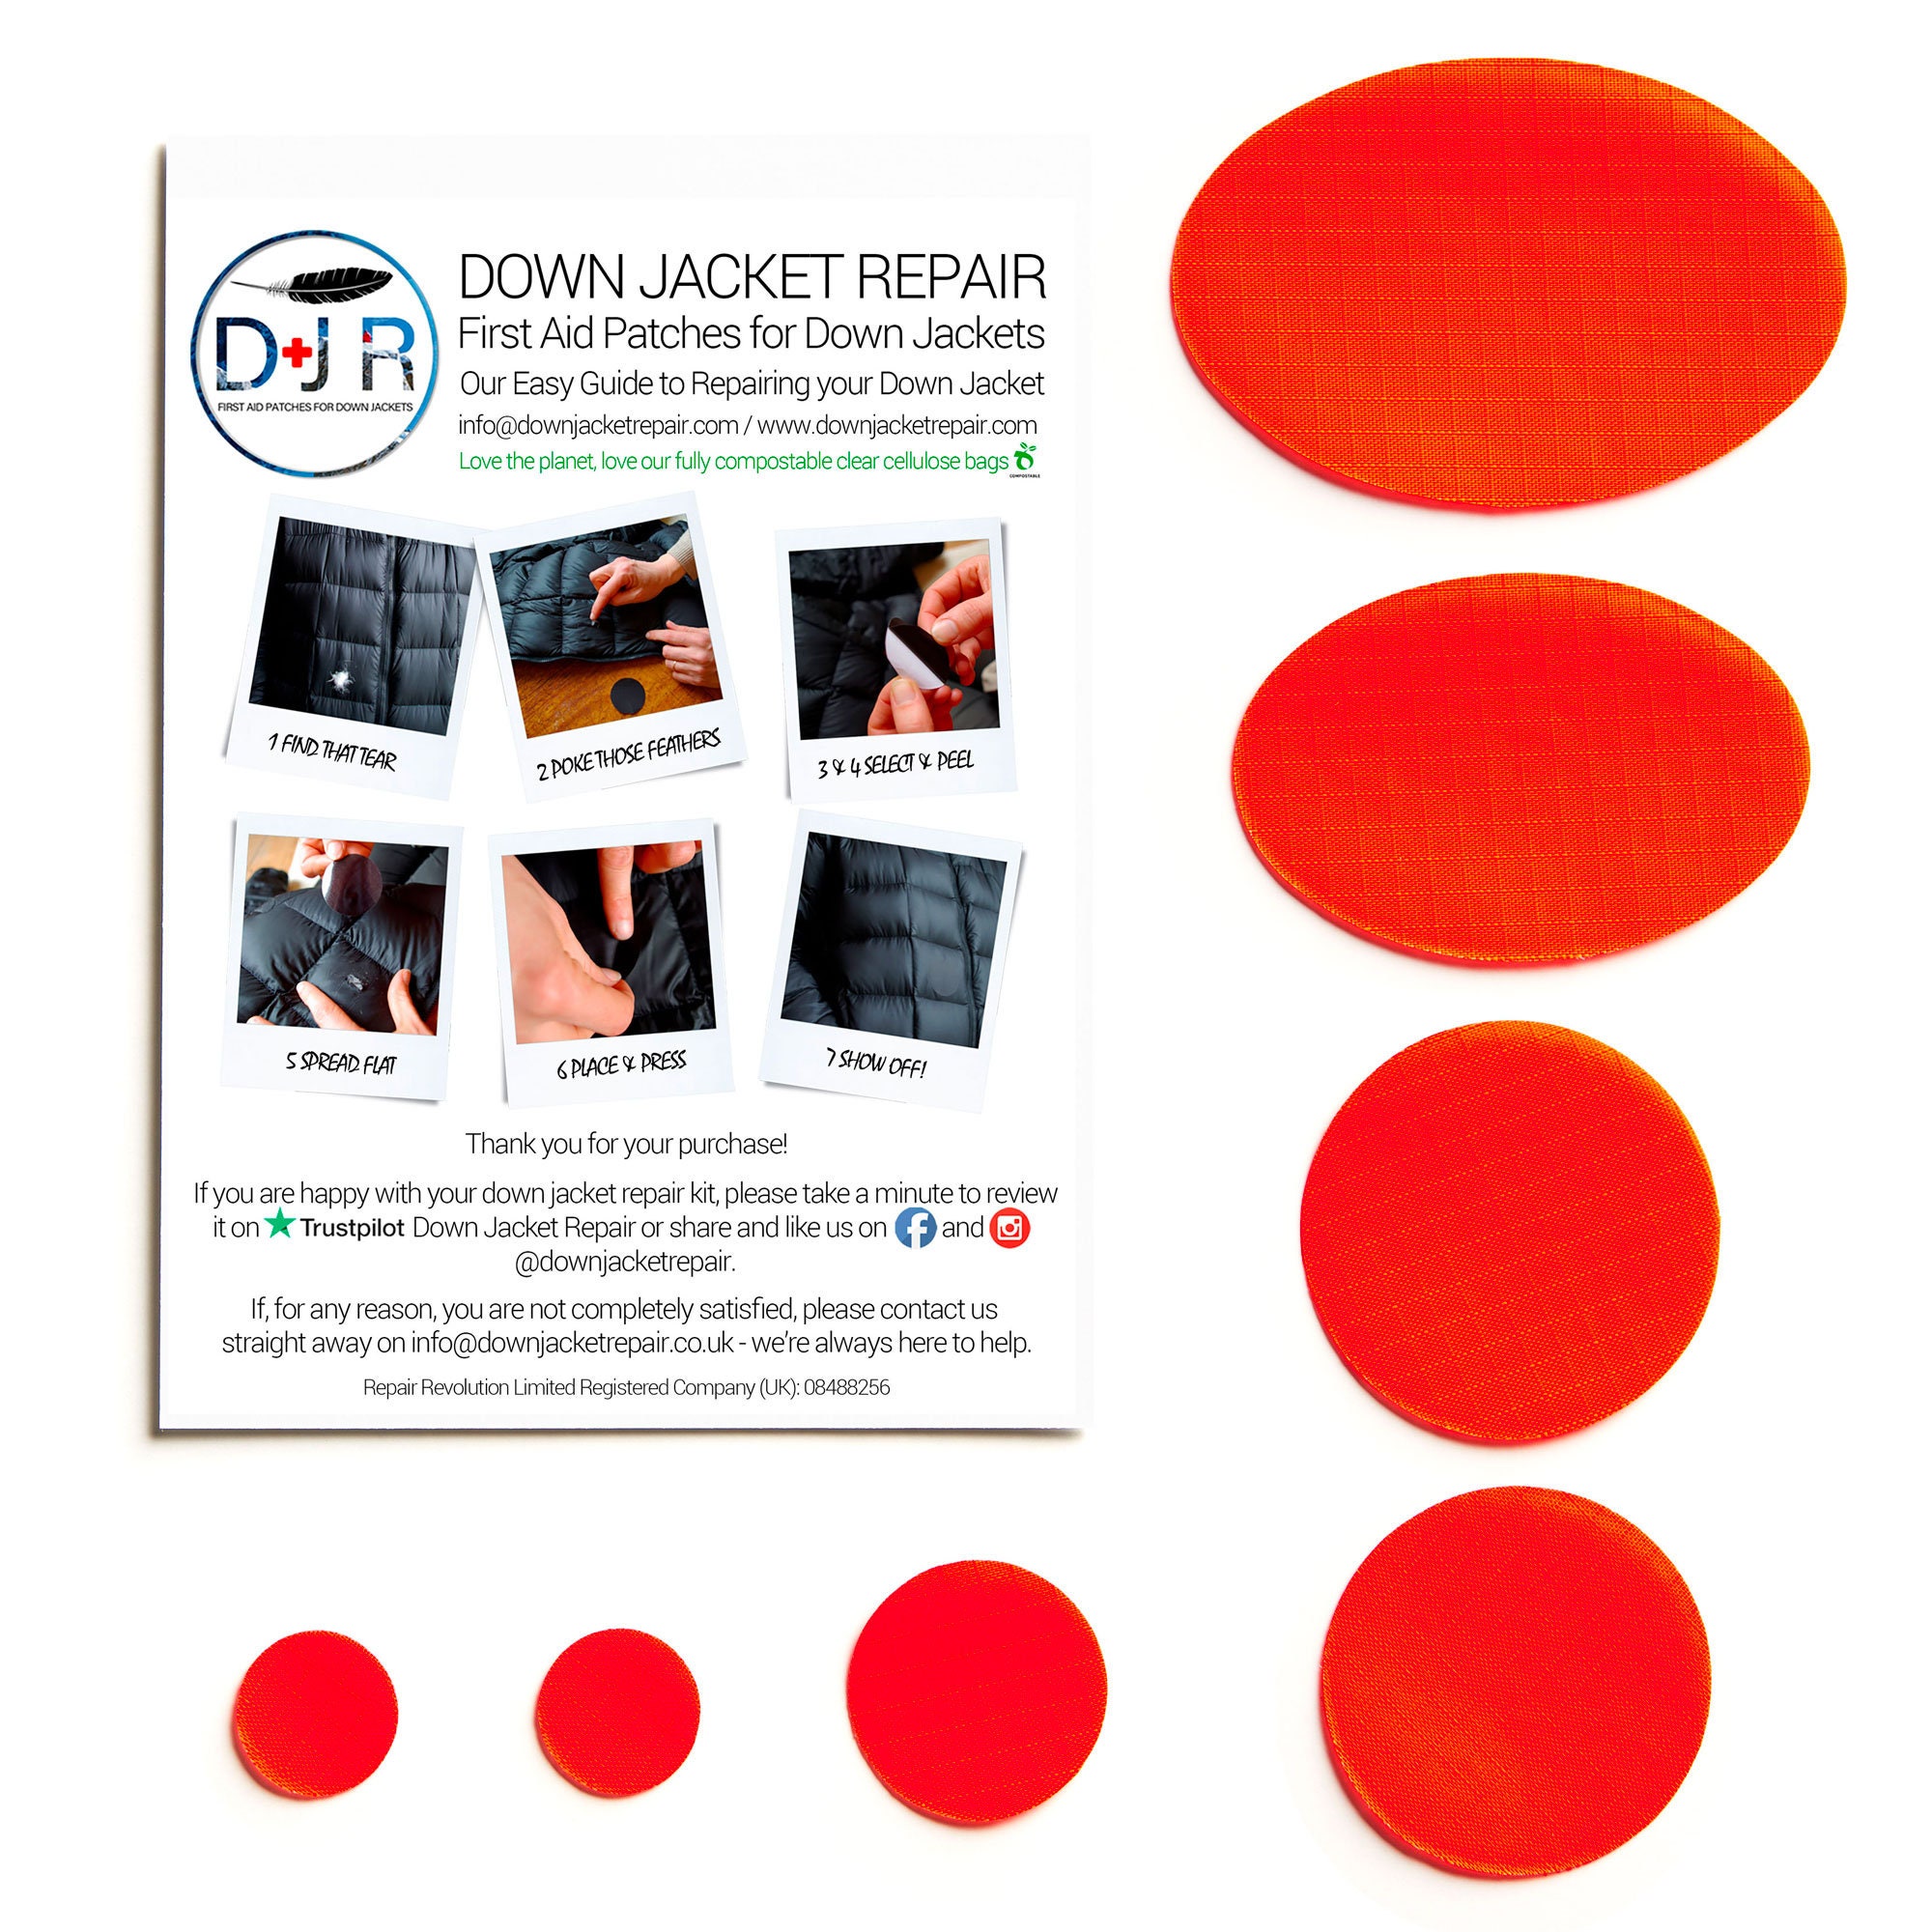 Self-adhesive Down Jacket Repair Patches Fluro Orange for Down Jackets or  Sleeping Bags First Aid for Down Jackets 